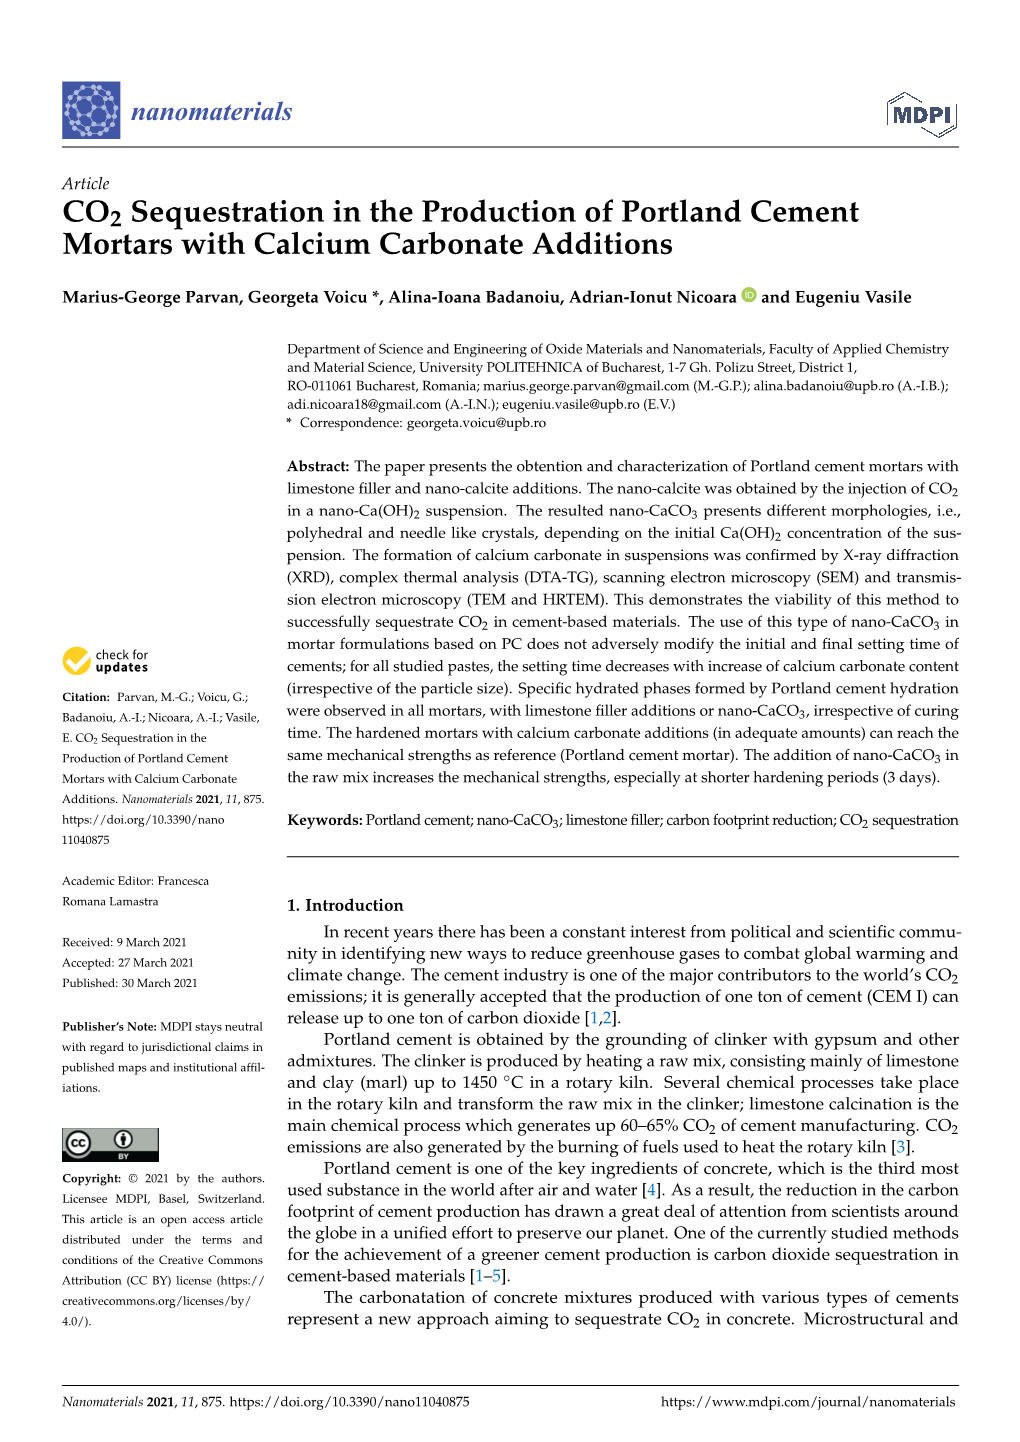 CO2 Sequestration in the Production of Portland Cement Mortars with Calcium Carbonate Additions